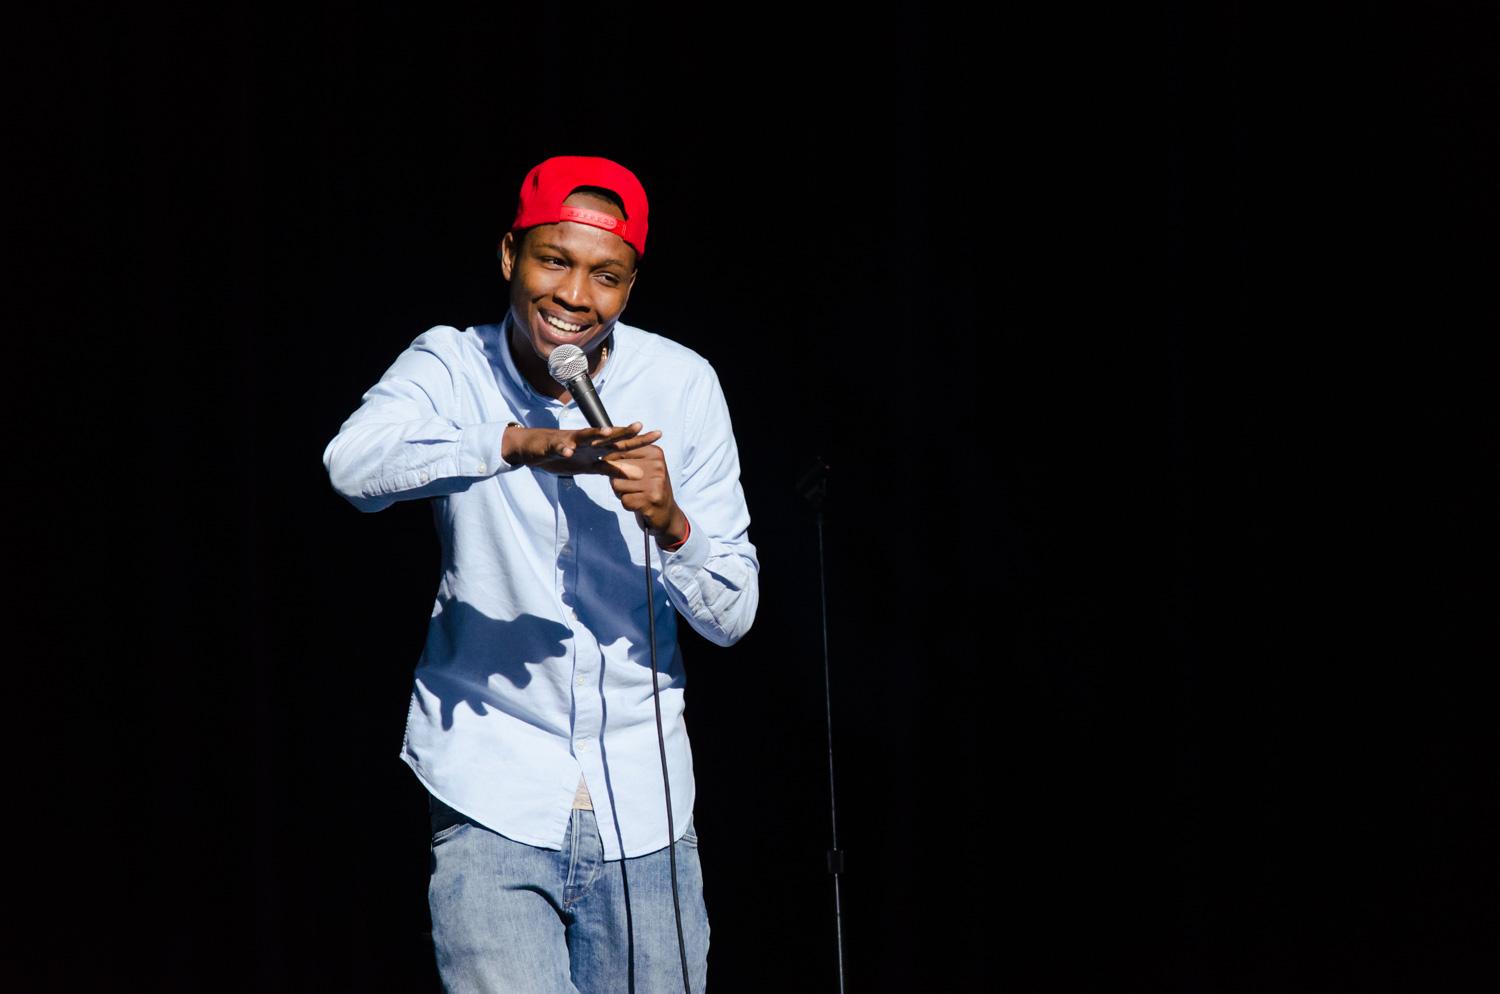 Comedian Justin Elliot cracking himself up in the middle of his set. Tim Murphy | Web Photo Editor